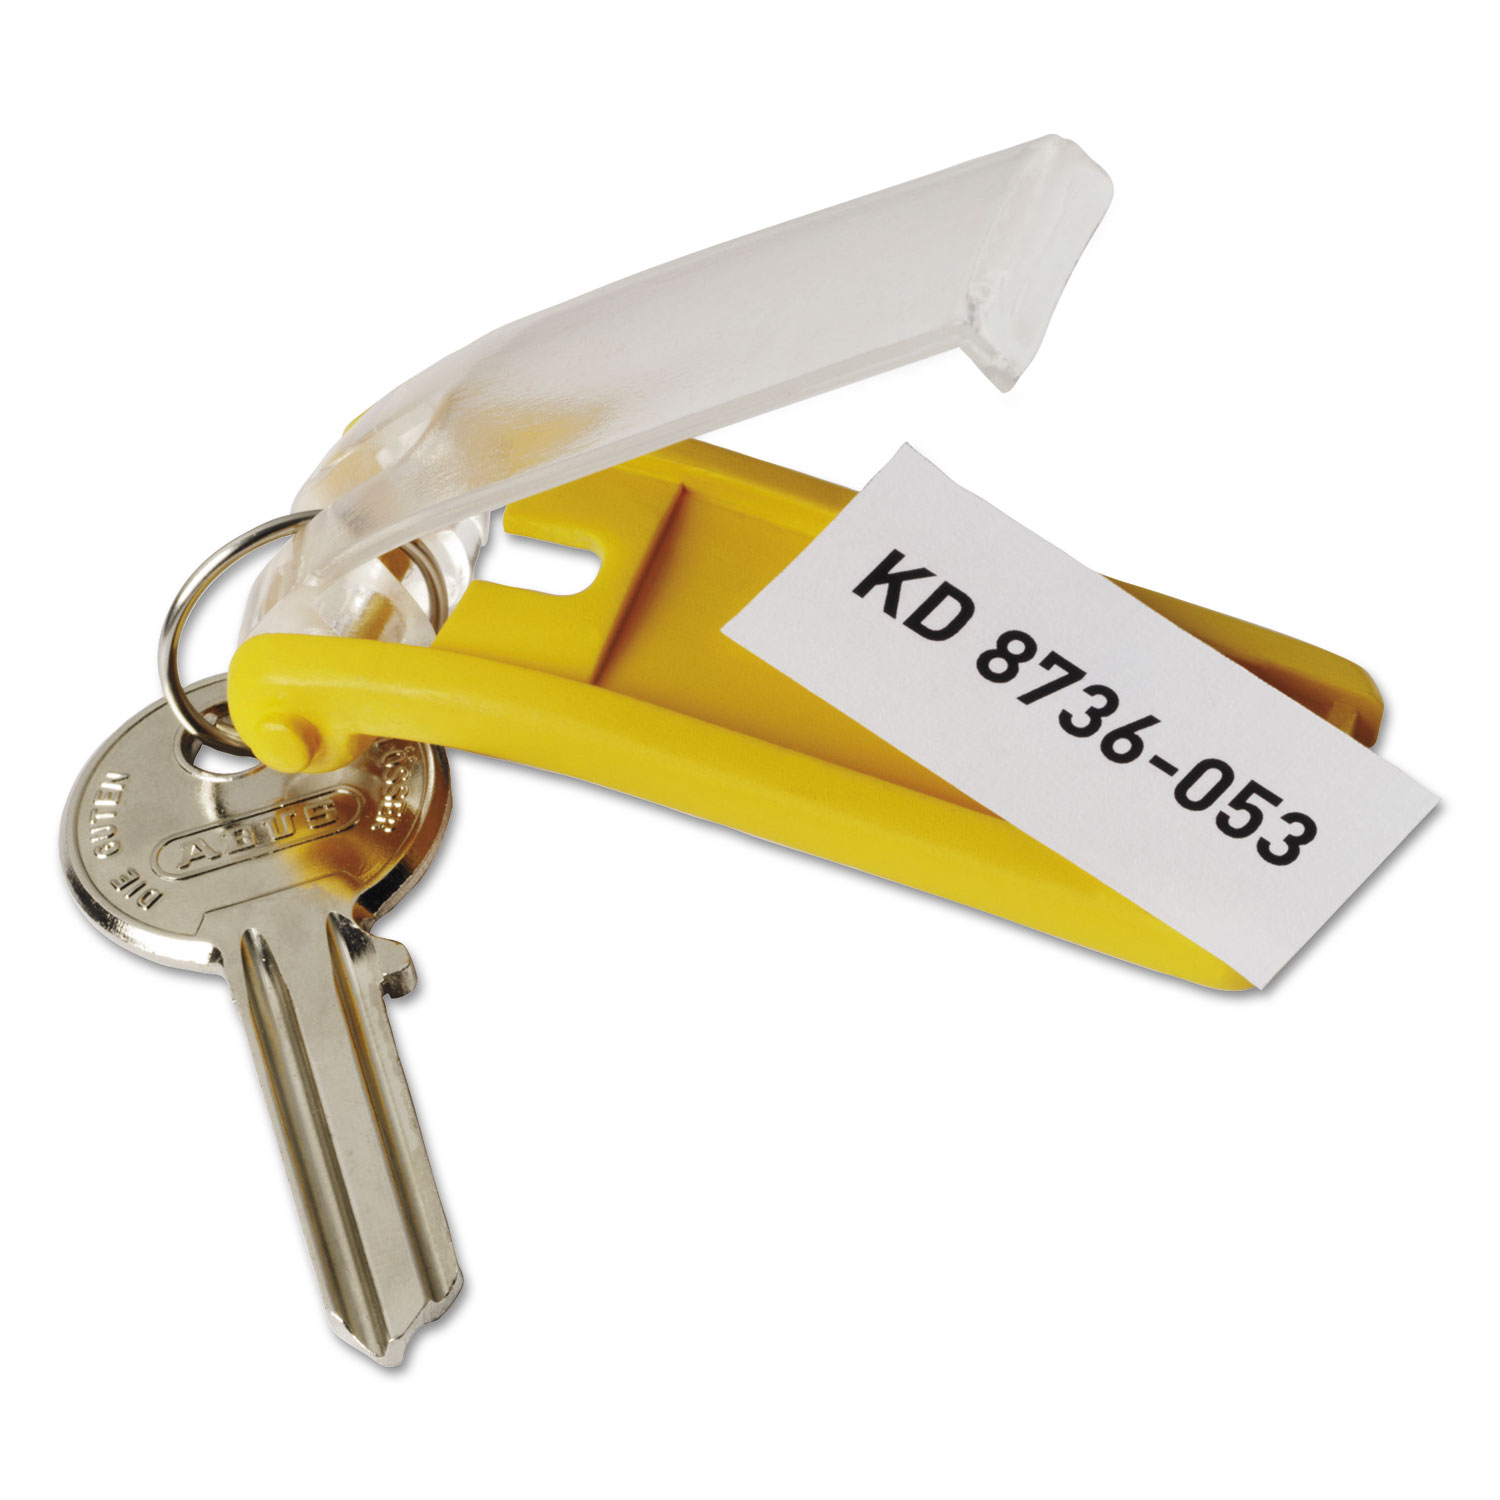 TOSEERY 100Pack Plastic Key Tags with Container, Key Labels with Ring Label Window Key Tags Key Tags with Labels, Size: One Size